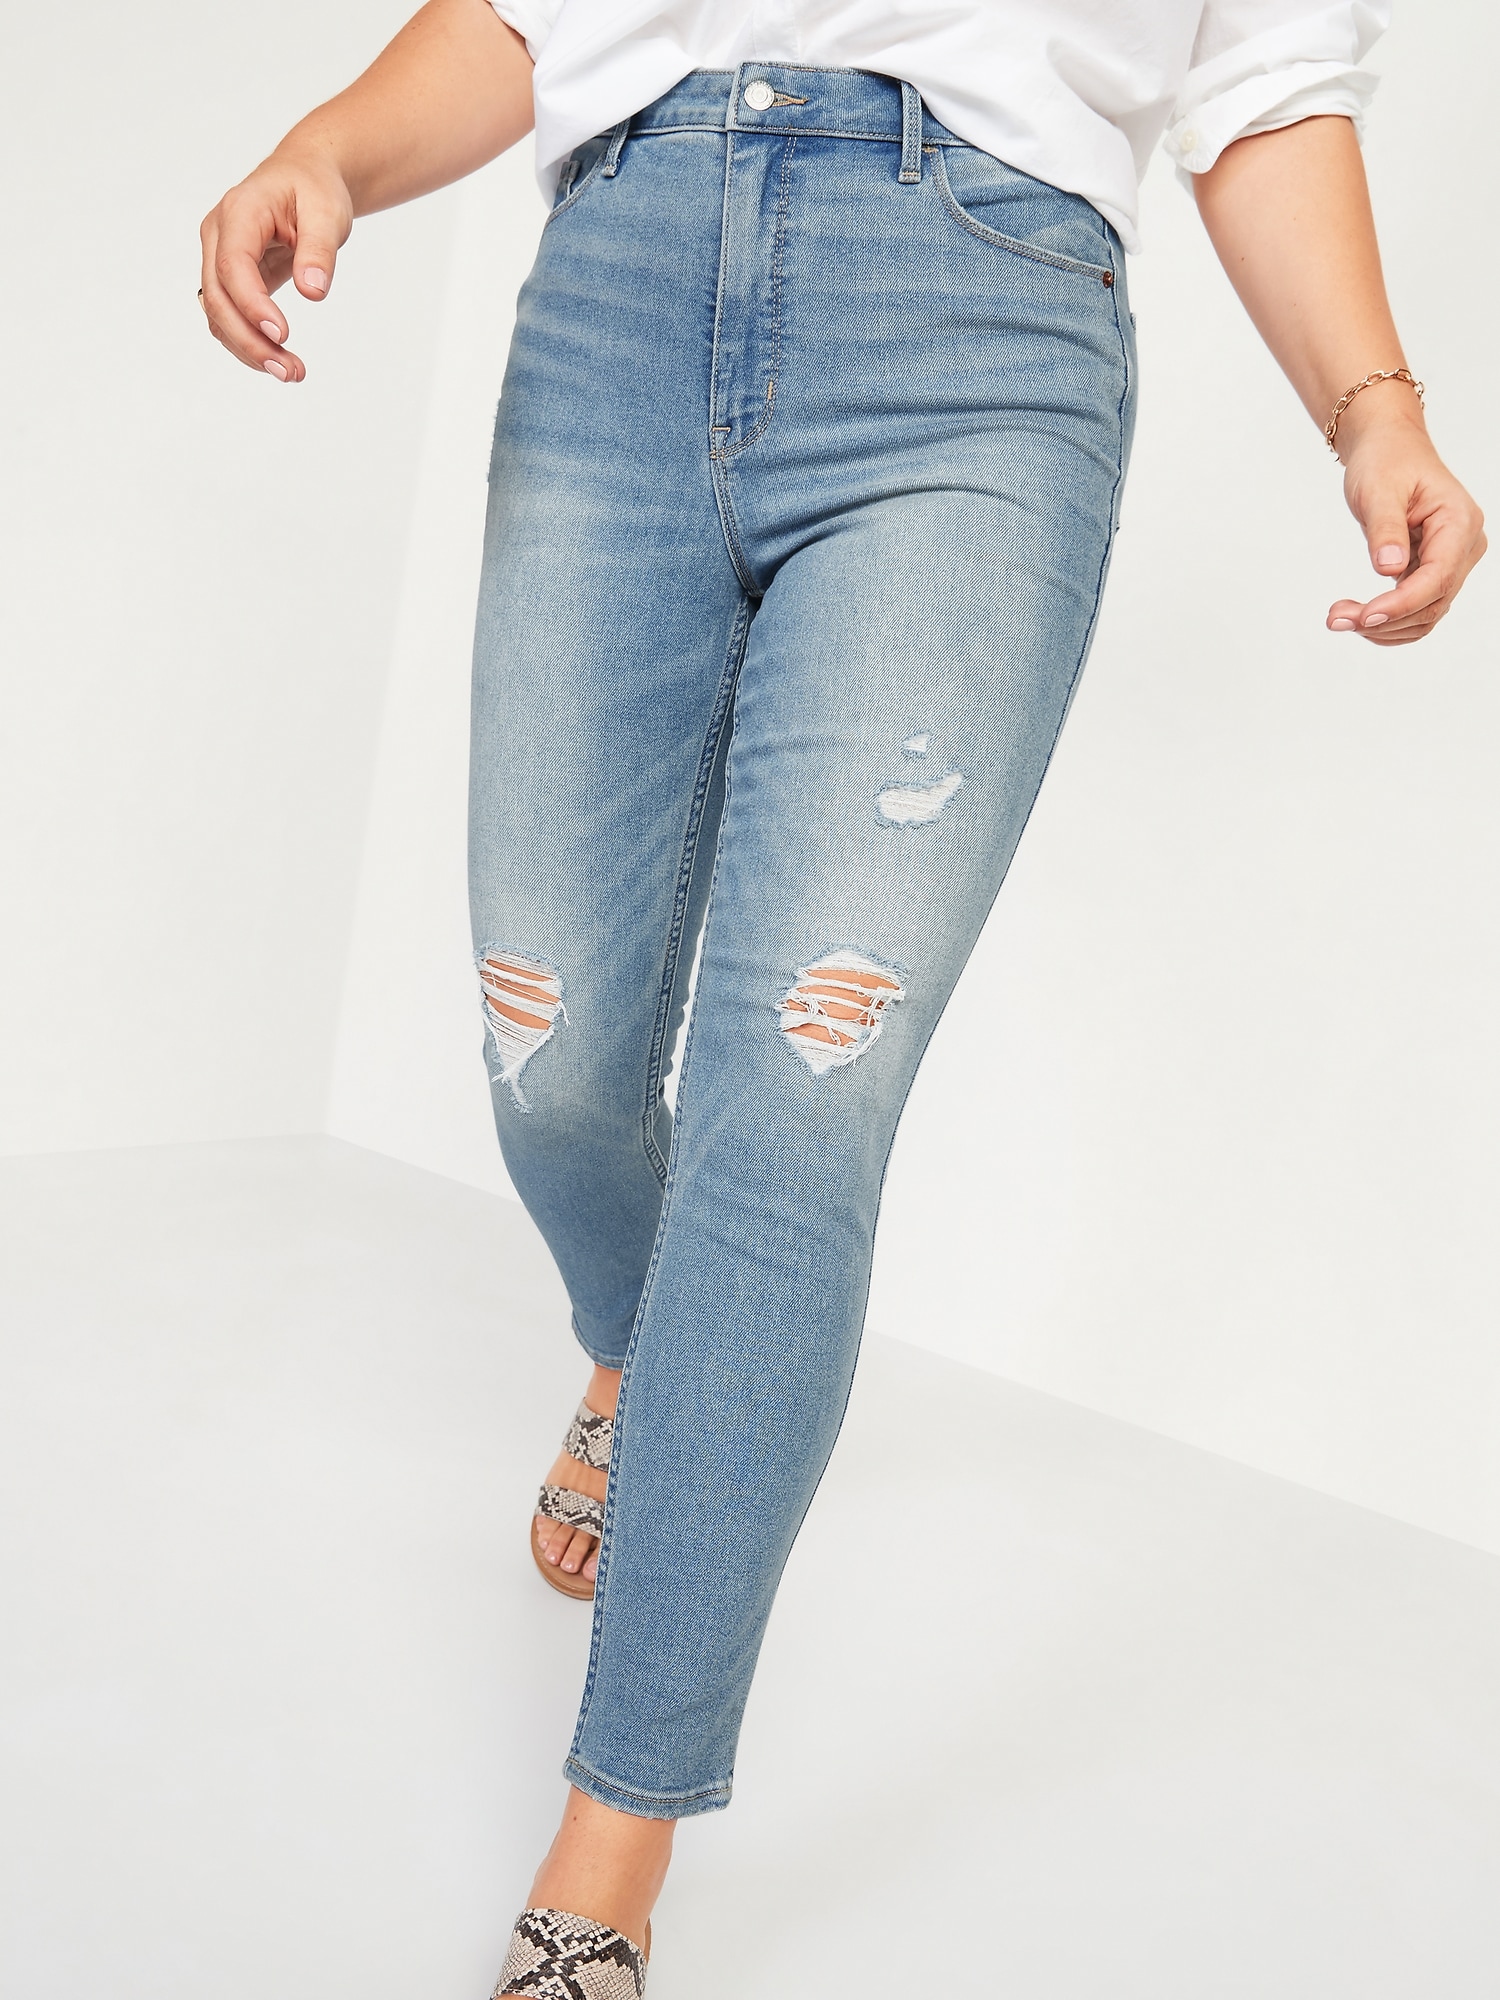 Extra High-Waisted Rockstar 360° Stretch Super Skinny Ripped Jeans for Women